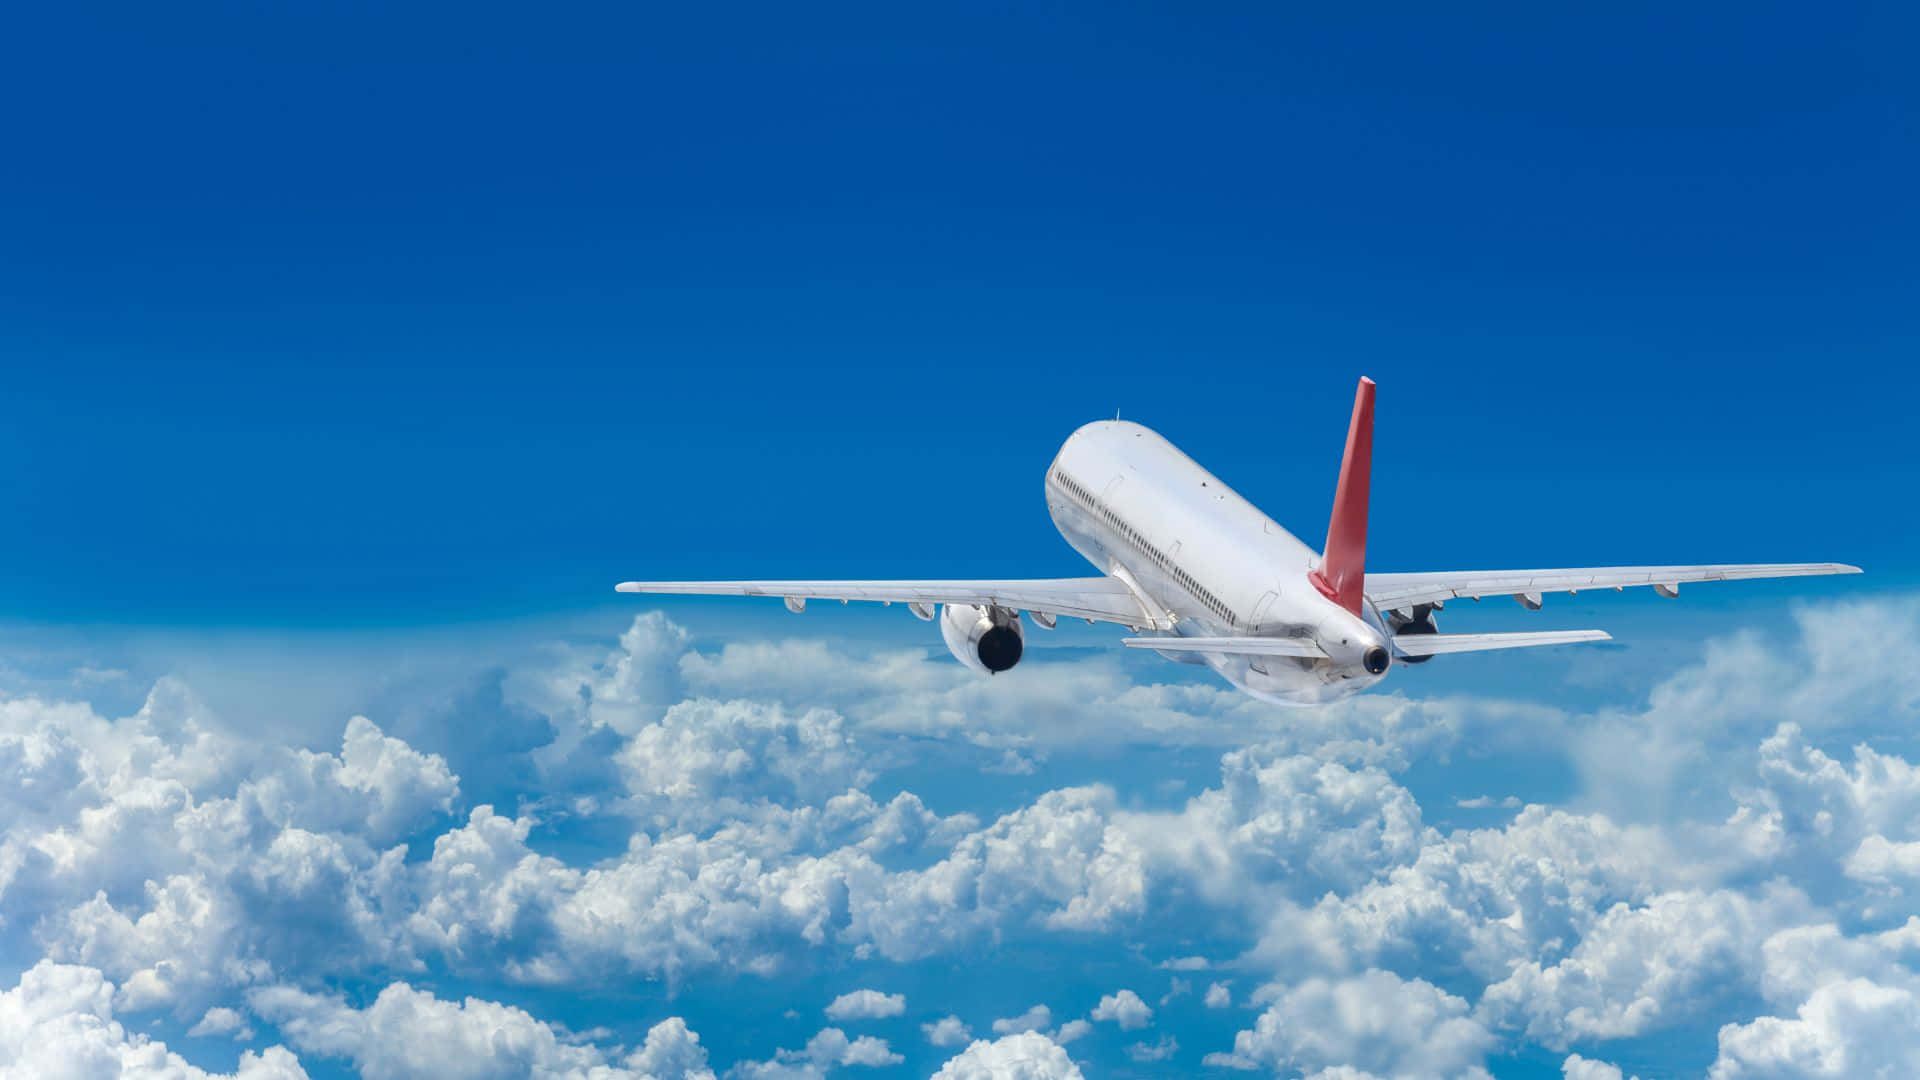 Airplane In The Blue Sky Background